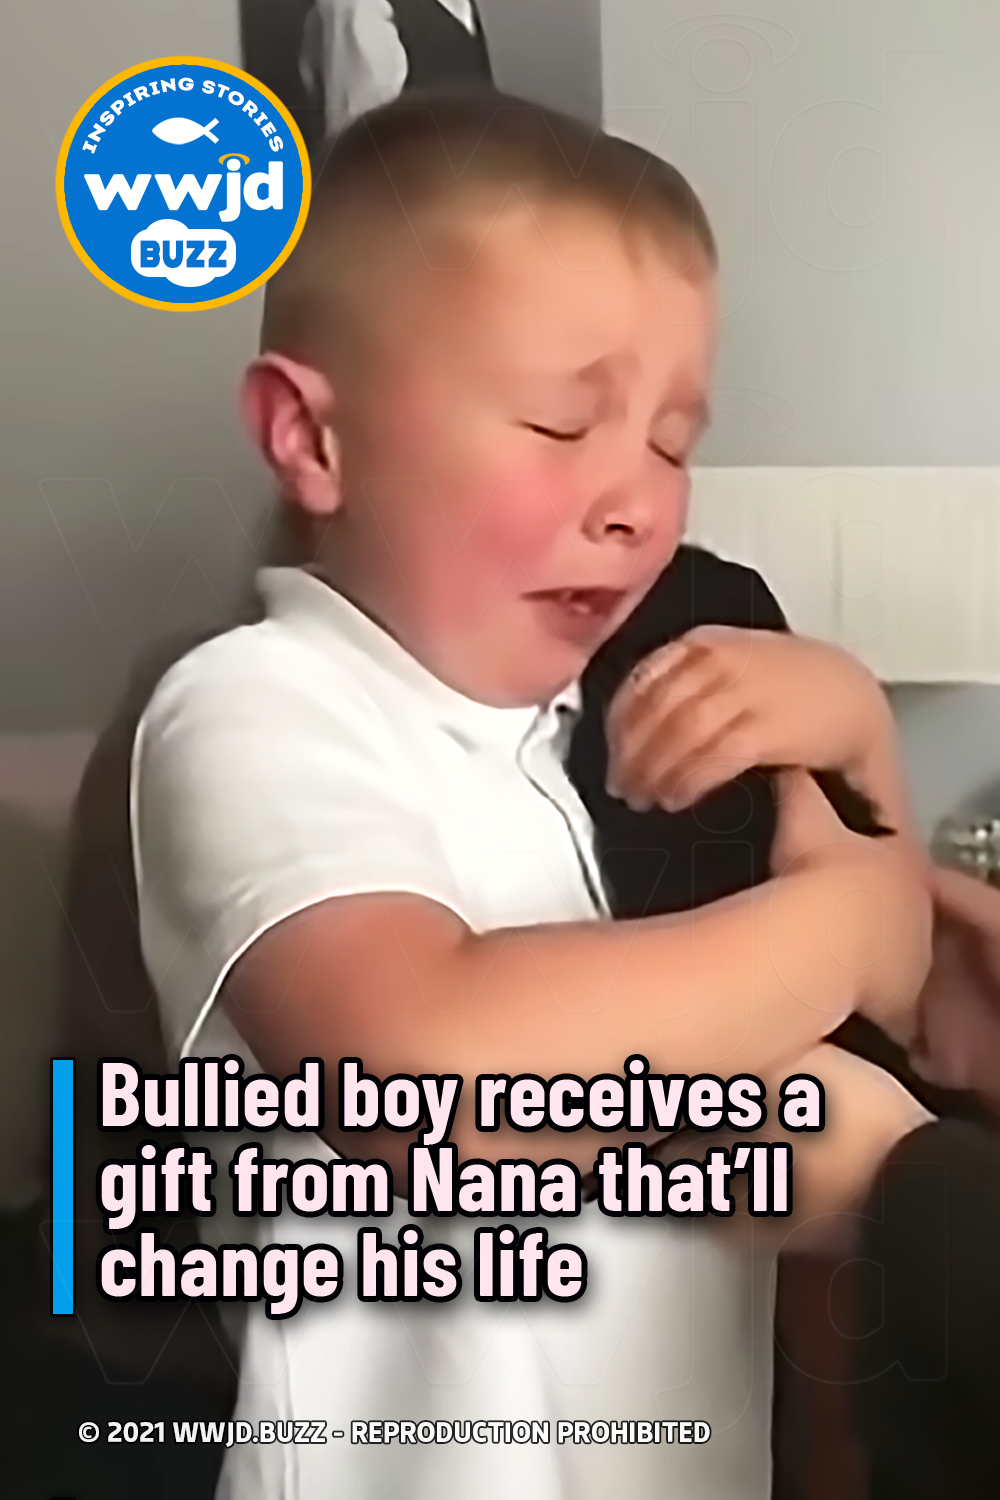 Bullied boy receives a gift from Nana that’ll change his life